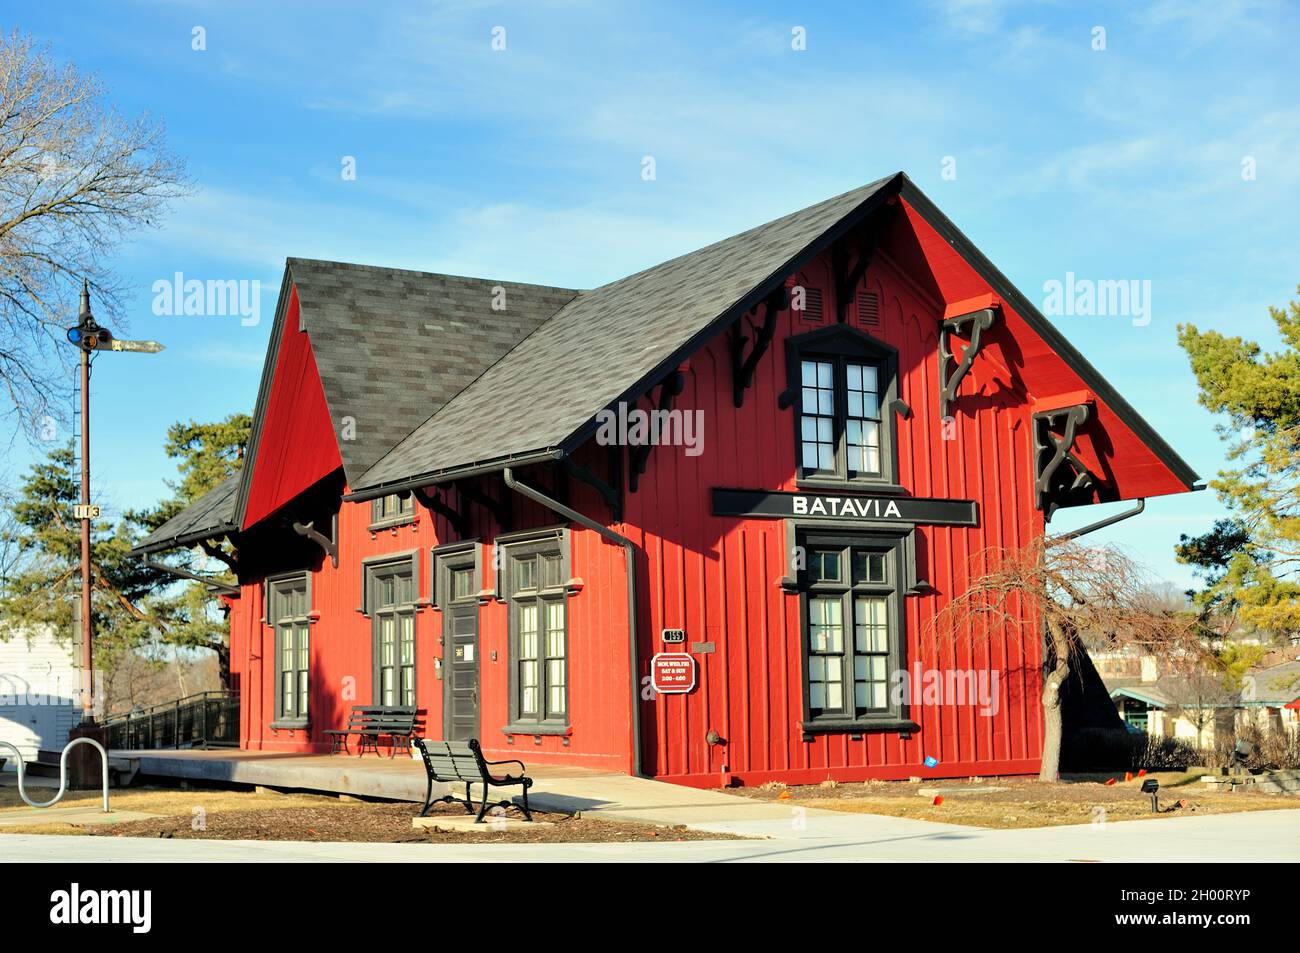 Batavia, Illinois, USA. The historic Batavia Depot that has been relocated and renovated and now stands as a museum near the Fox River. Stock Photo